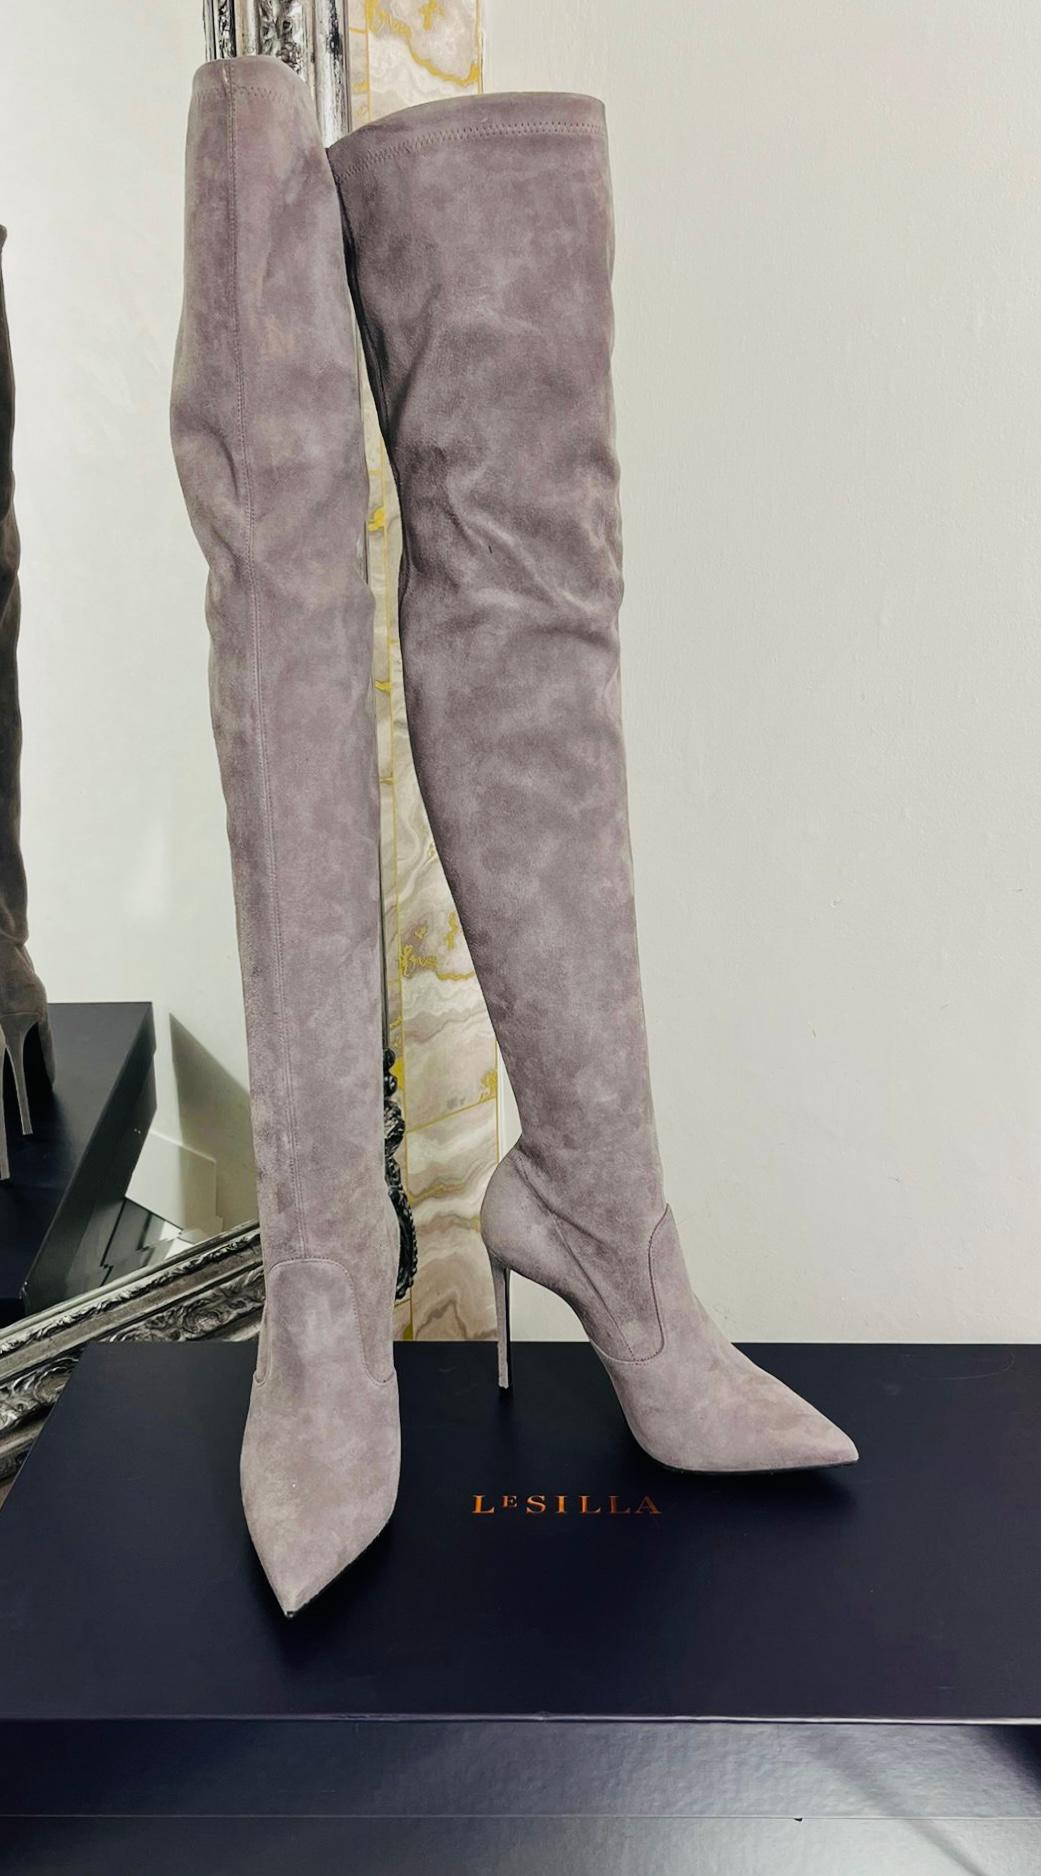 Le Silla Thigh-High Suede Boots

Taupe, heeled 'Eva' boots designed with stretch, pull-on style.

Detailed with pointed toe and high stiletto heel.

Size – 36

Condition – Excellent/Brand New

Composition – Suede

Comes with – Box